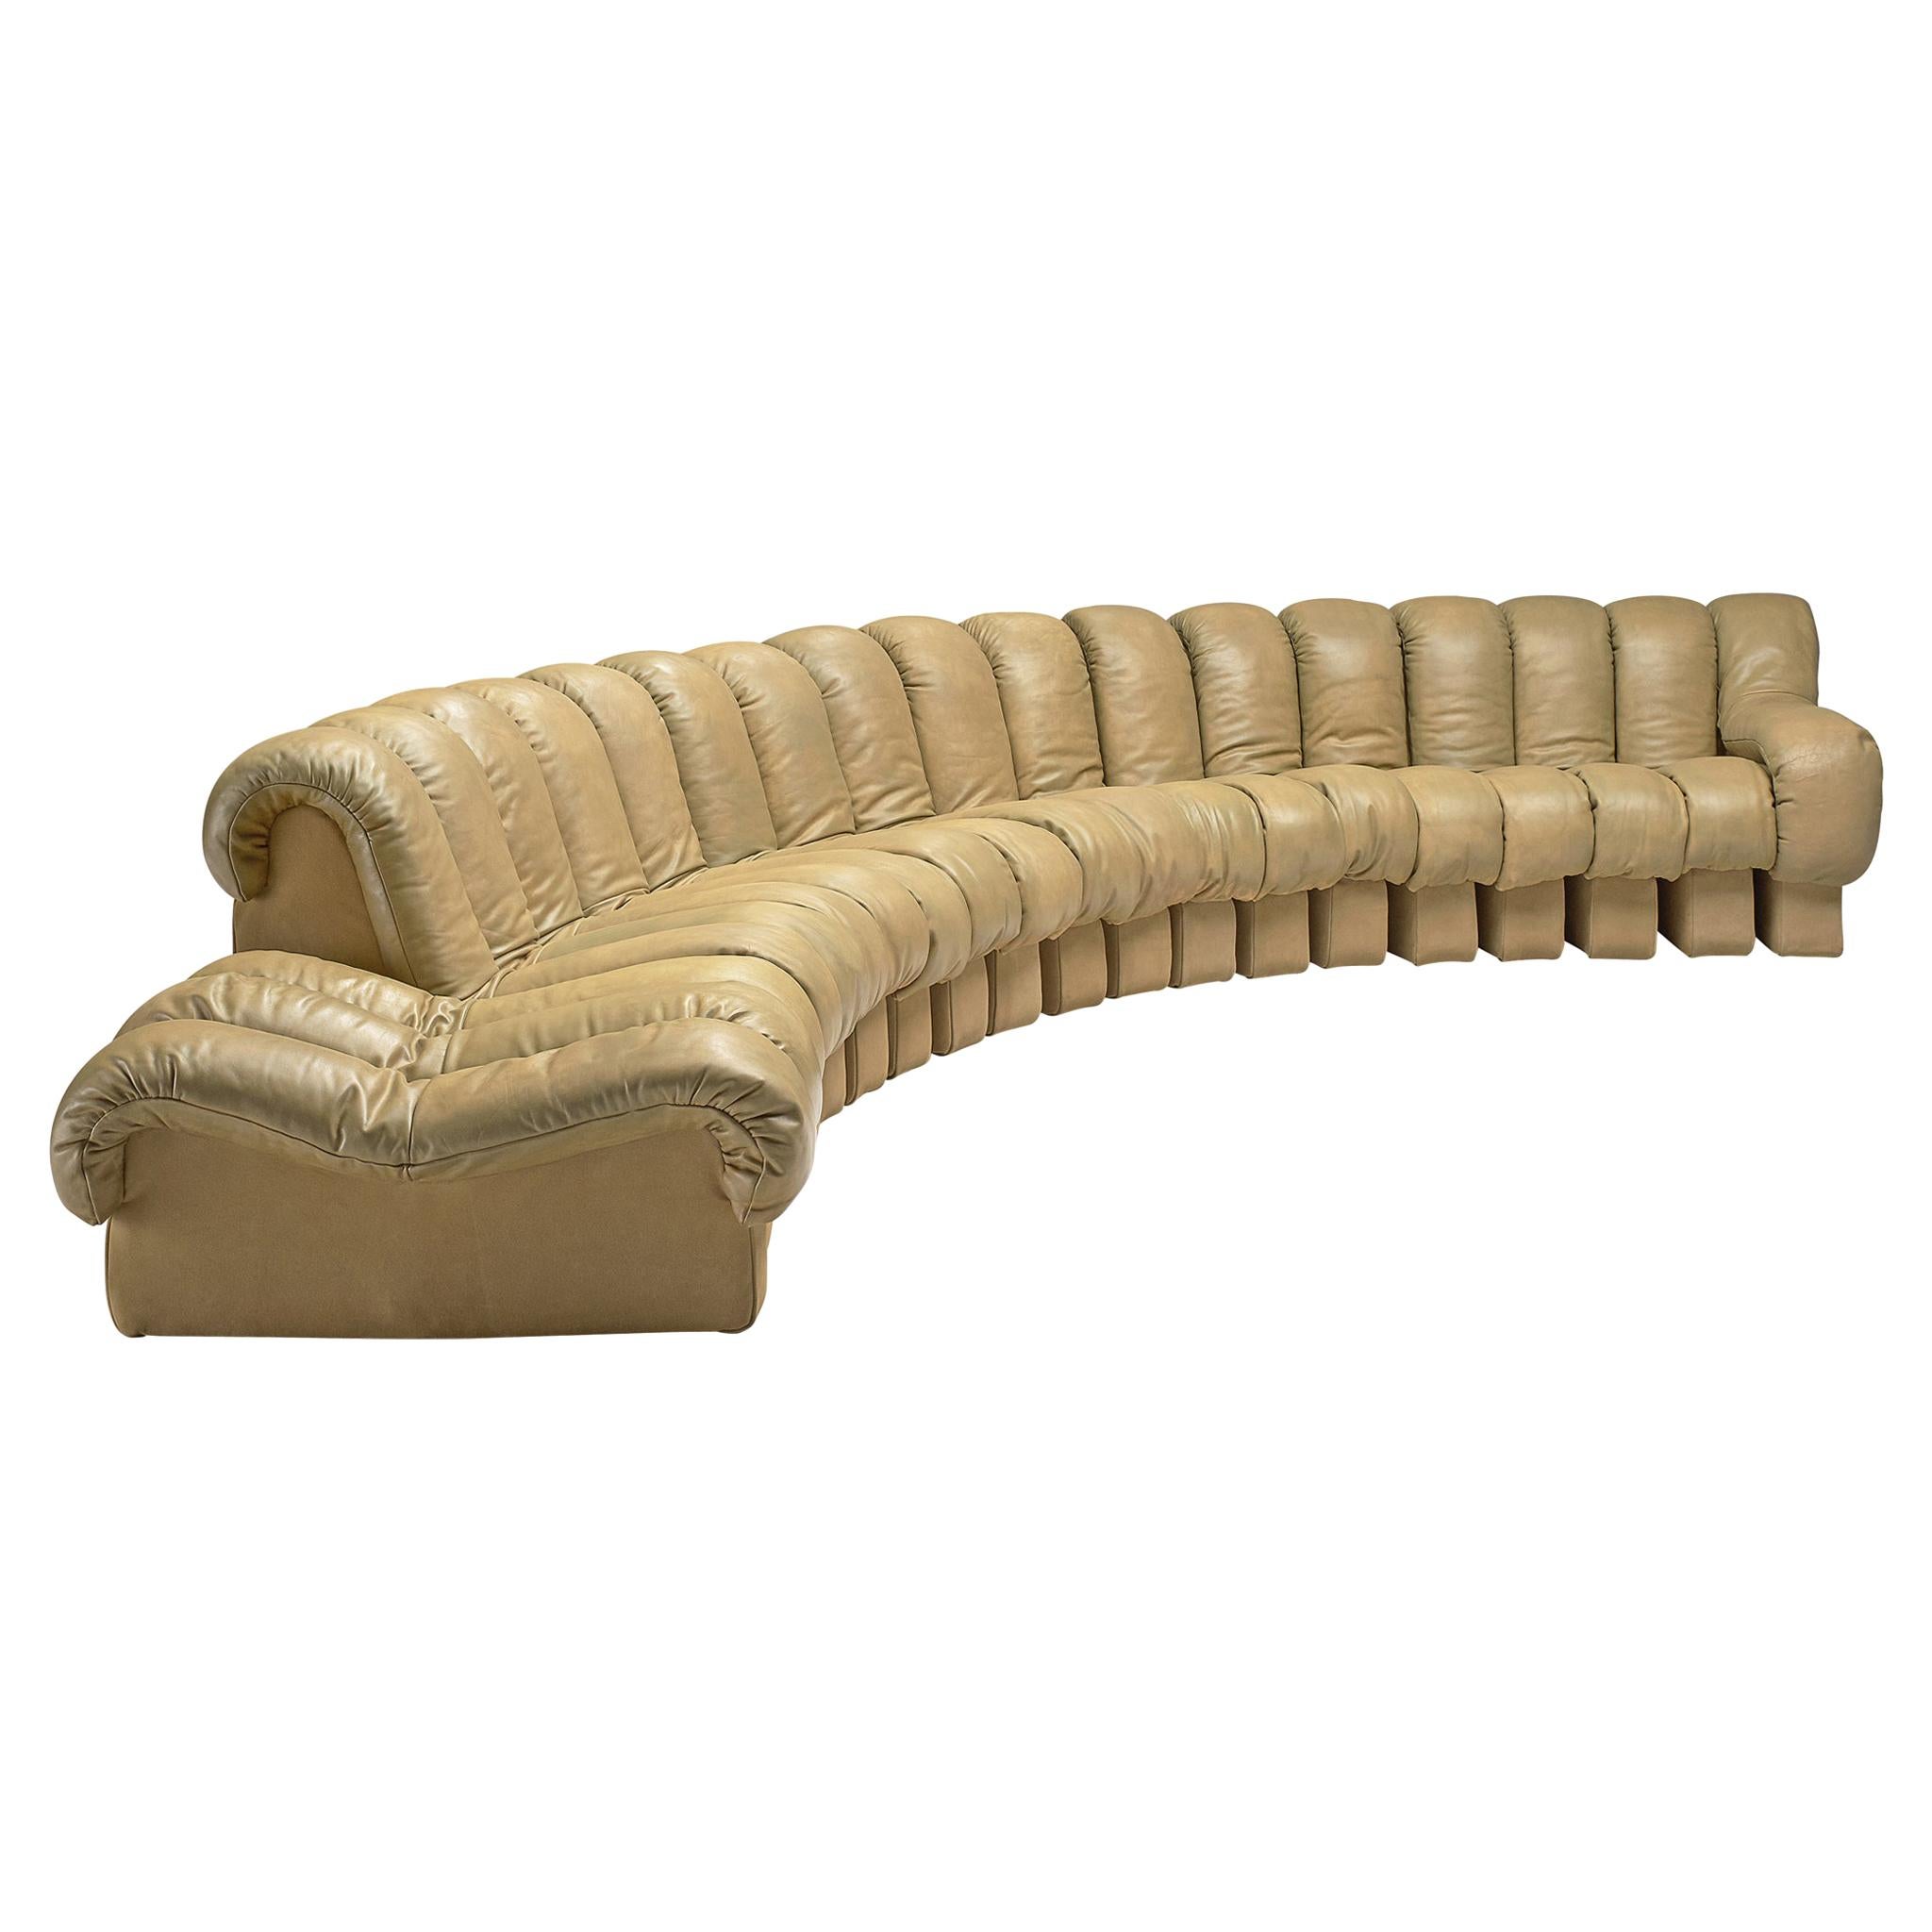 De Sede 'Snake' DS-600 Sofa in Beige Leather and Suede